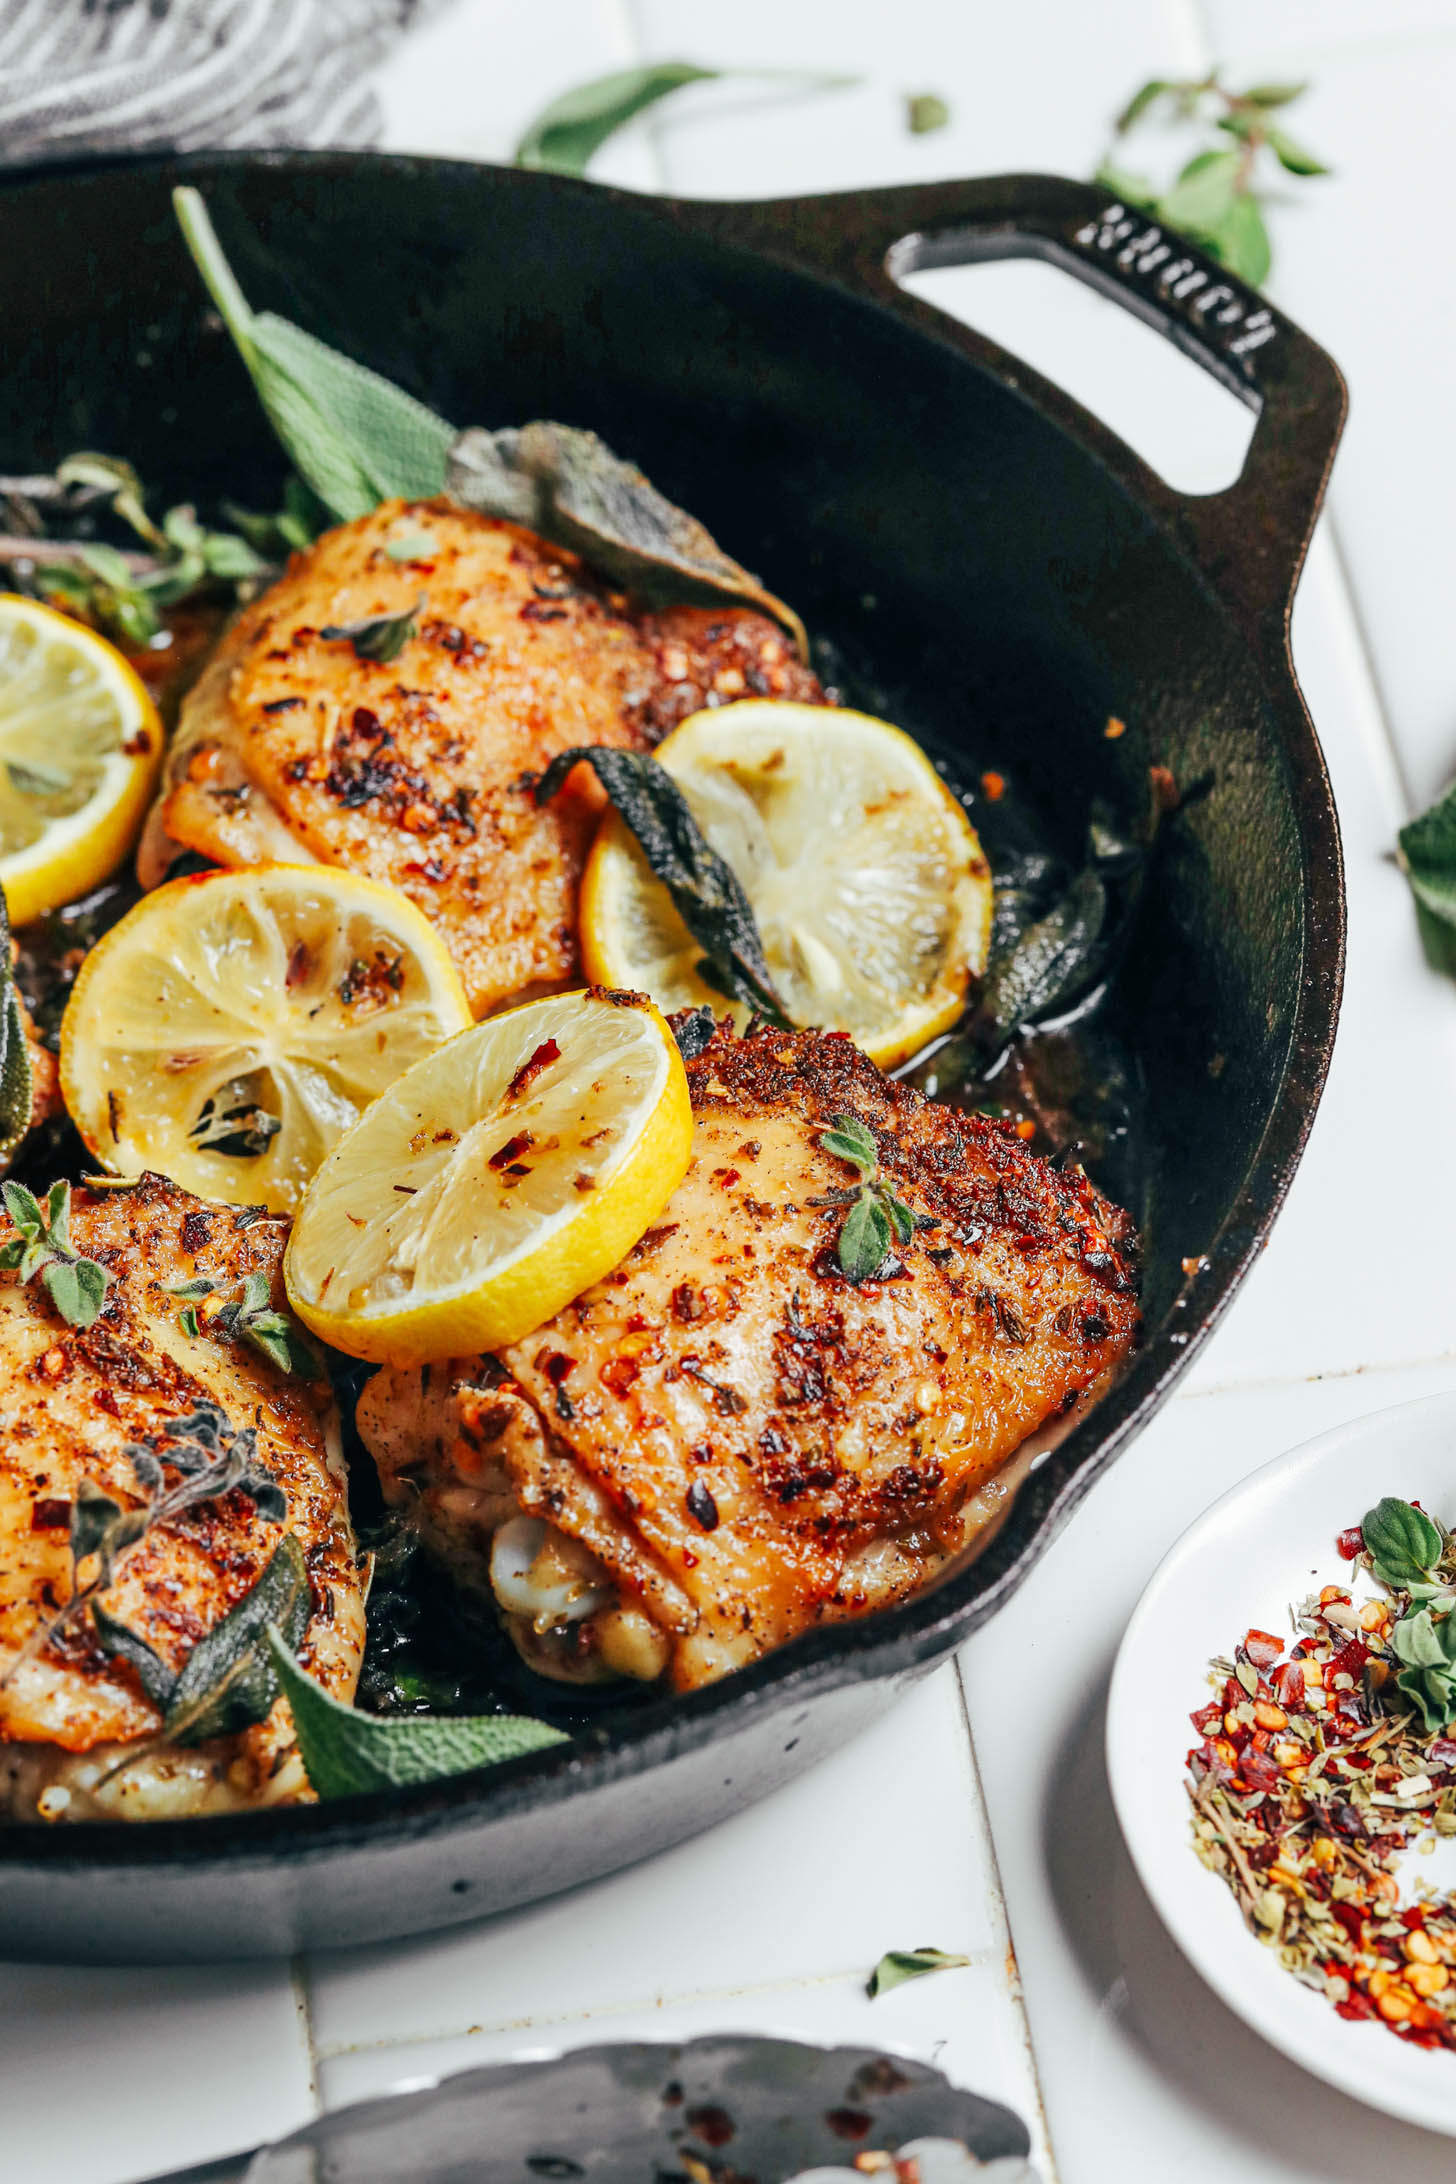 Golden brown roasted chicken thighs in a pan with lemon and herbs